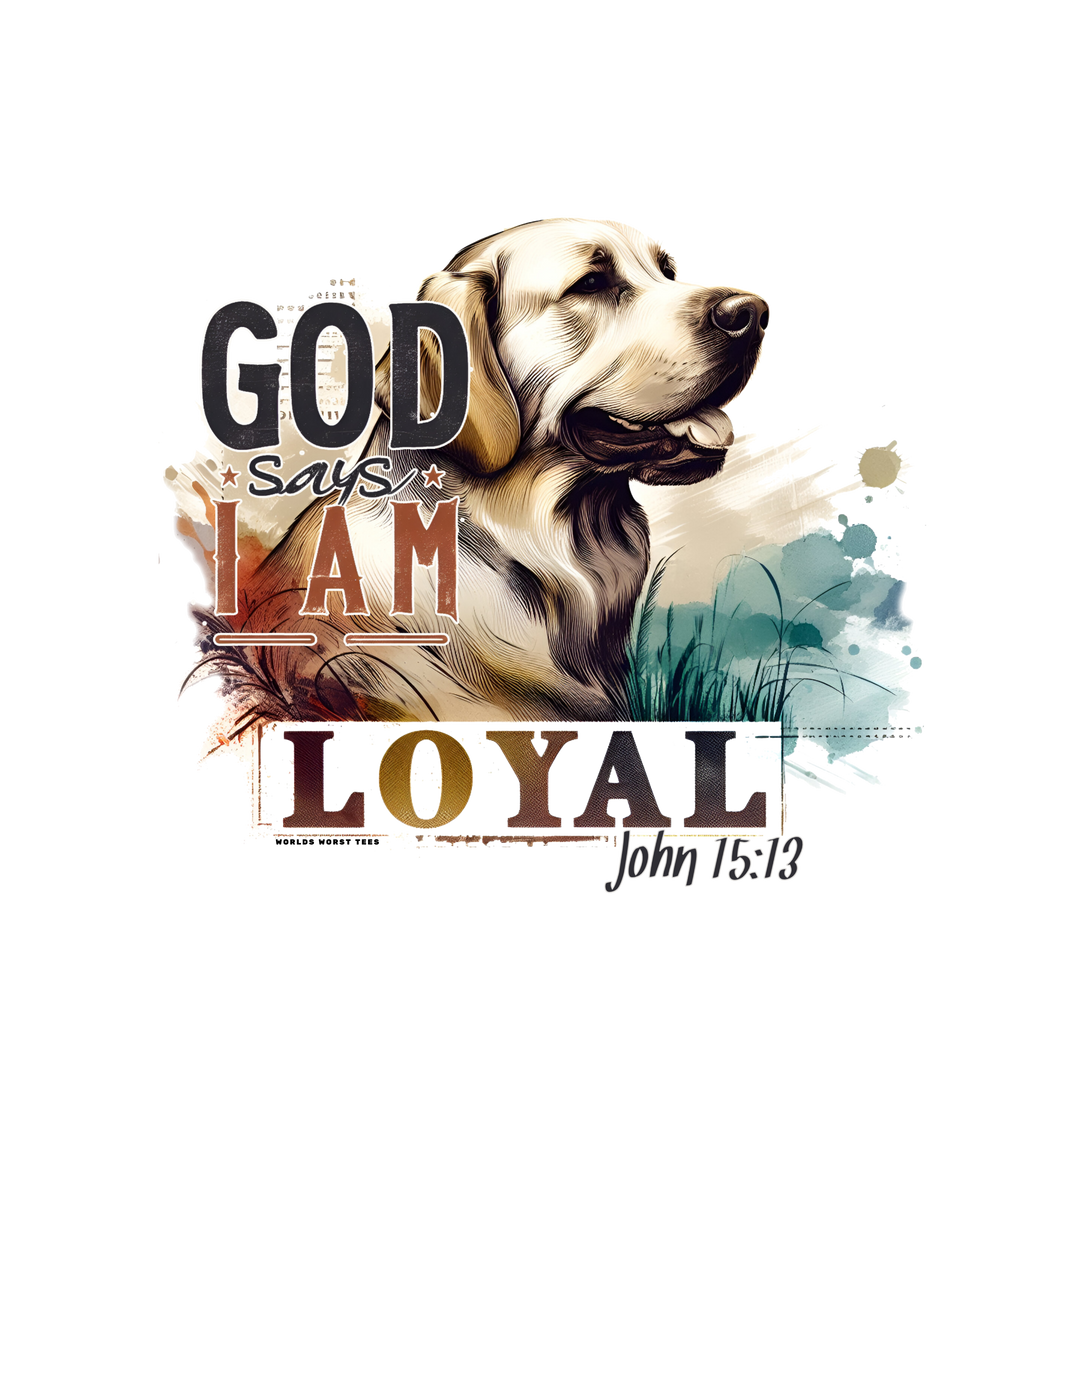 A black and white graphic tee, the I am Loyal Tee, featuring a dog design with text. Made of 100% ring-spun cotton, garment-dyed for softness, and boasting a relaxed fit for daily wear.